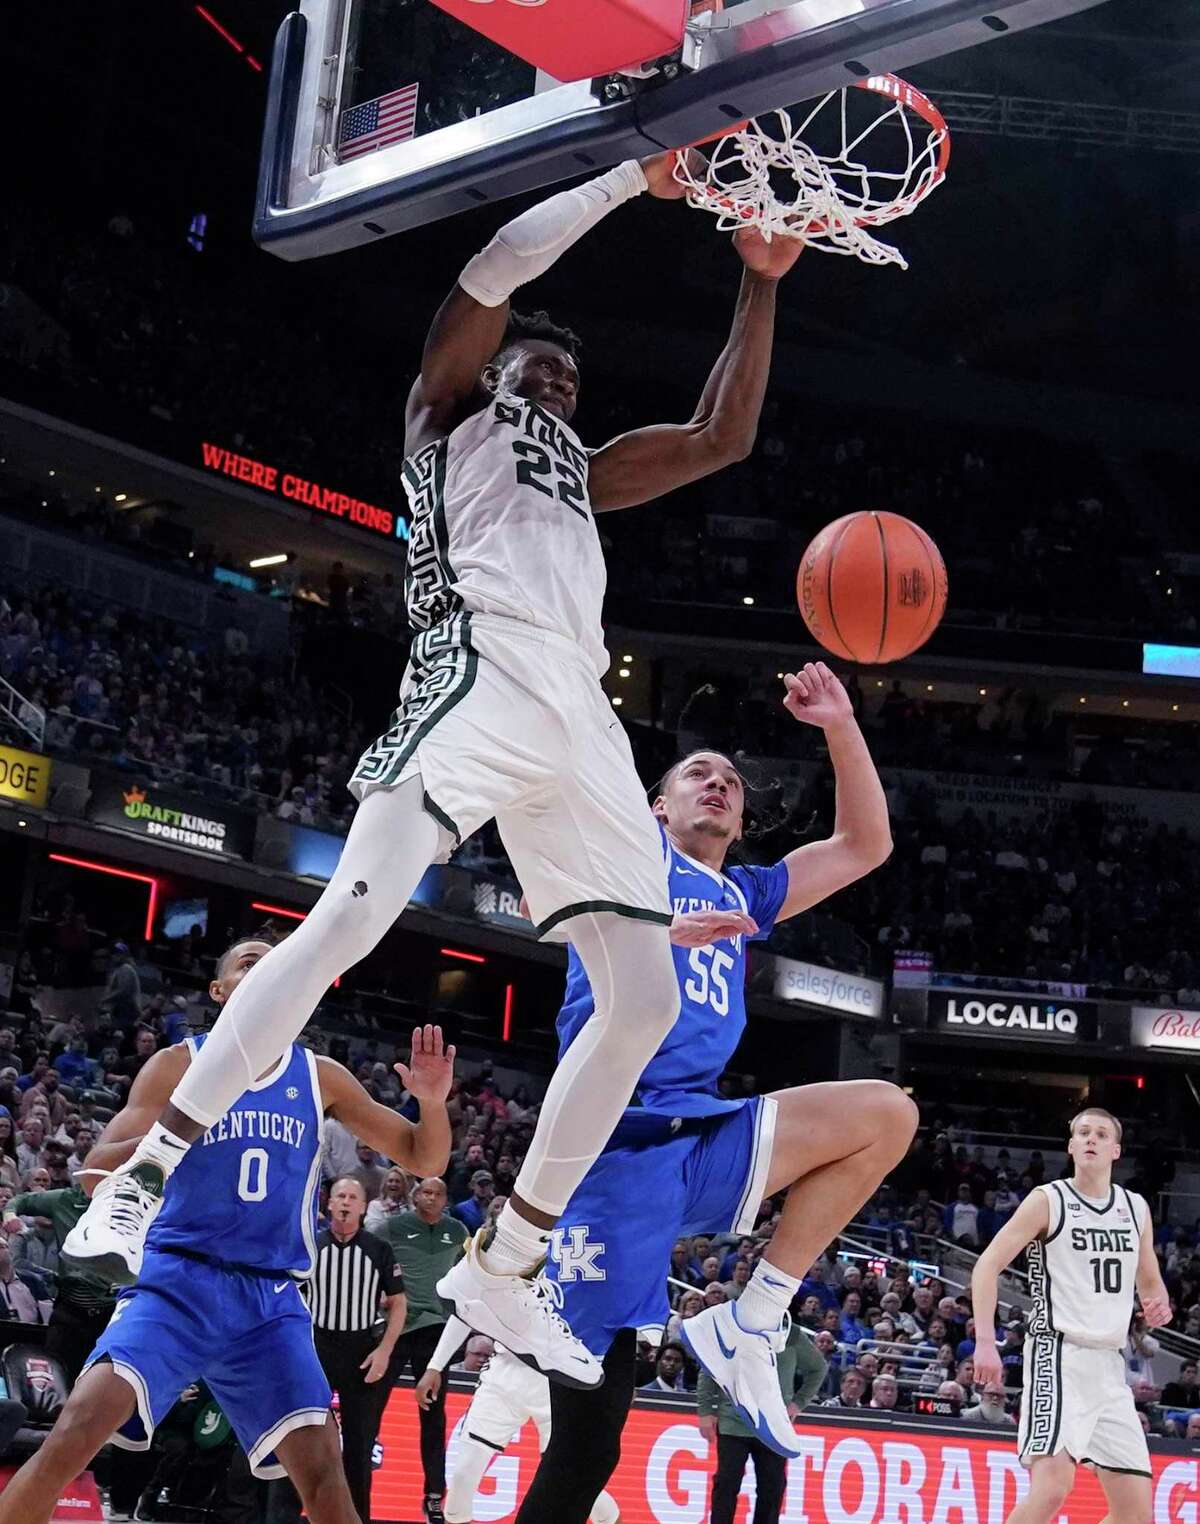 Michigan State center Mady Sissoko (22) scores over Kentucky forward Lance Ware (55) during overtime of an NCAA college basketball game, Tuesday, Nov. 15, 2022, in Indianapolis. (AP Photo/Darron Cummings)